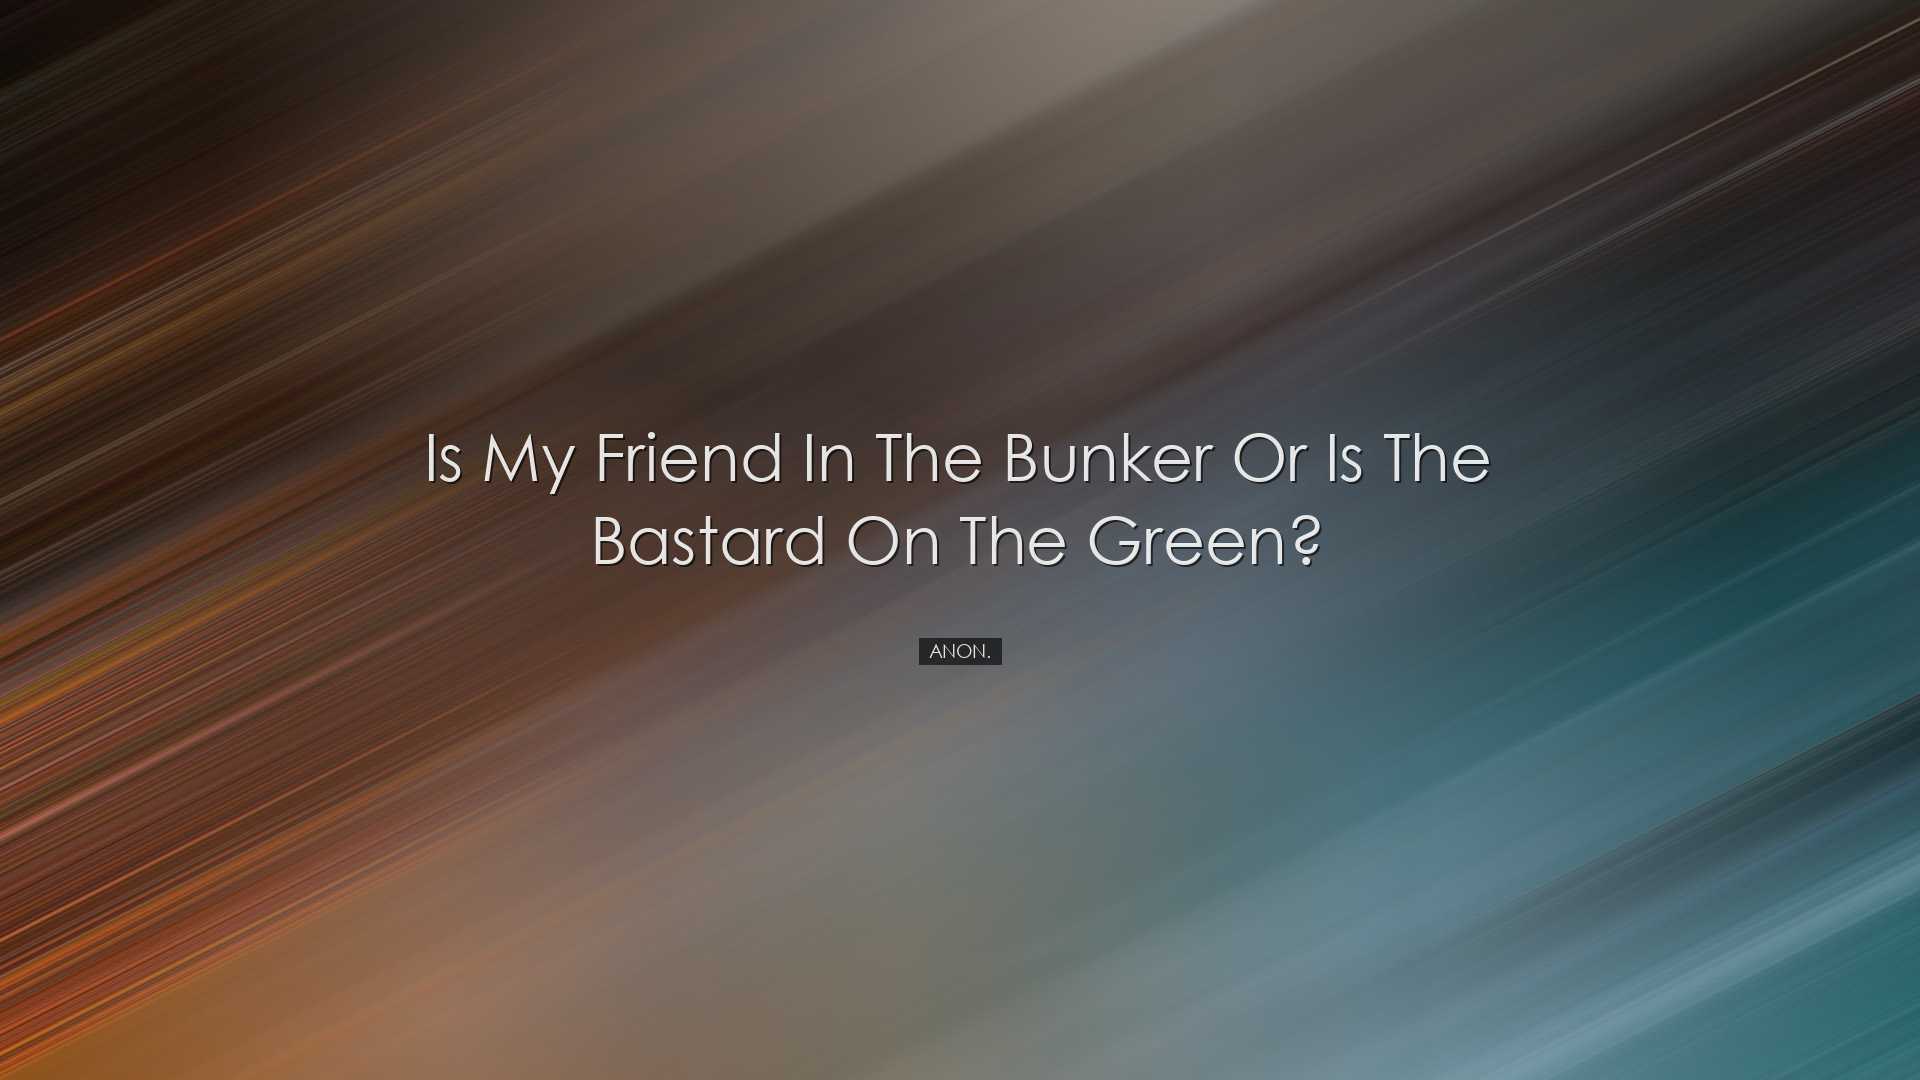 Is my friend in the bunker or is the bastard on the green? - Anon.